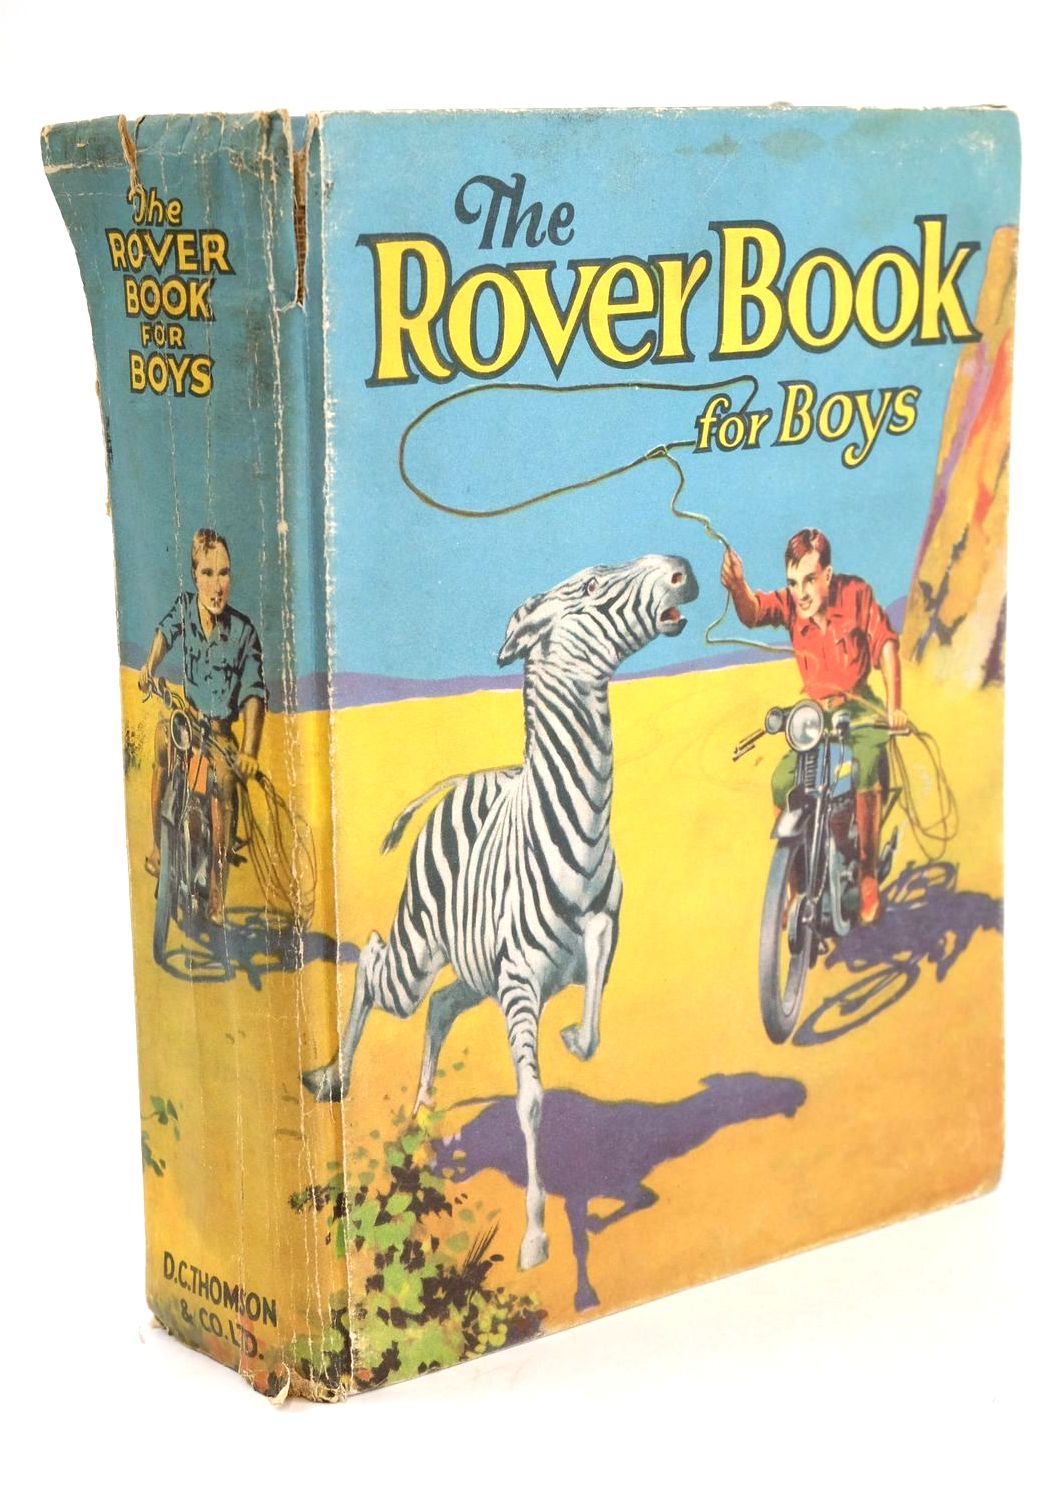 Photo of THE ROVER BOOK FOR BOYS 1933 written by Mackenzie, Falconer
White, Richard
Radcliffe, Arthur
et al, published by D.C. Thomson & Co Ltd. (STOCK CODE: 1324786)  for sale by Stella & Rose's Books